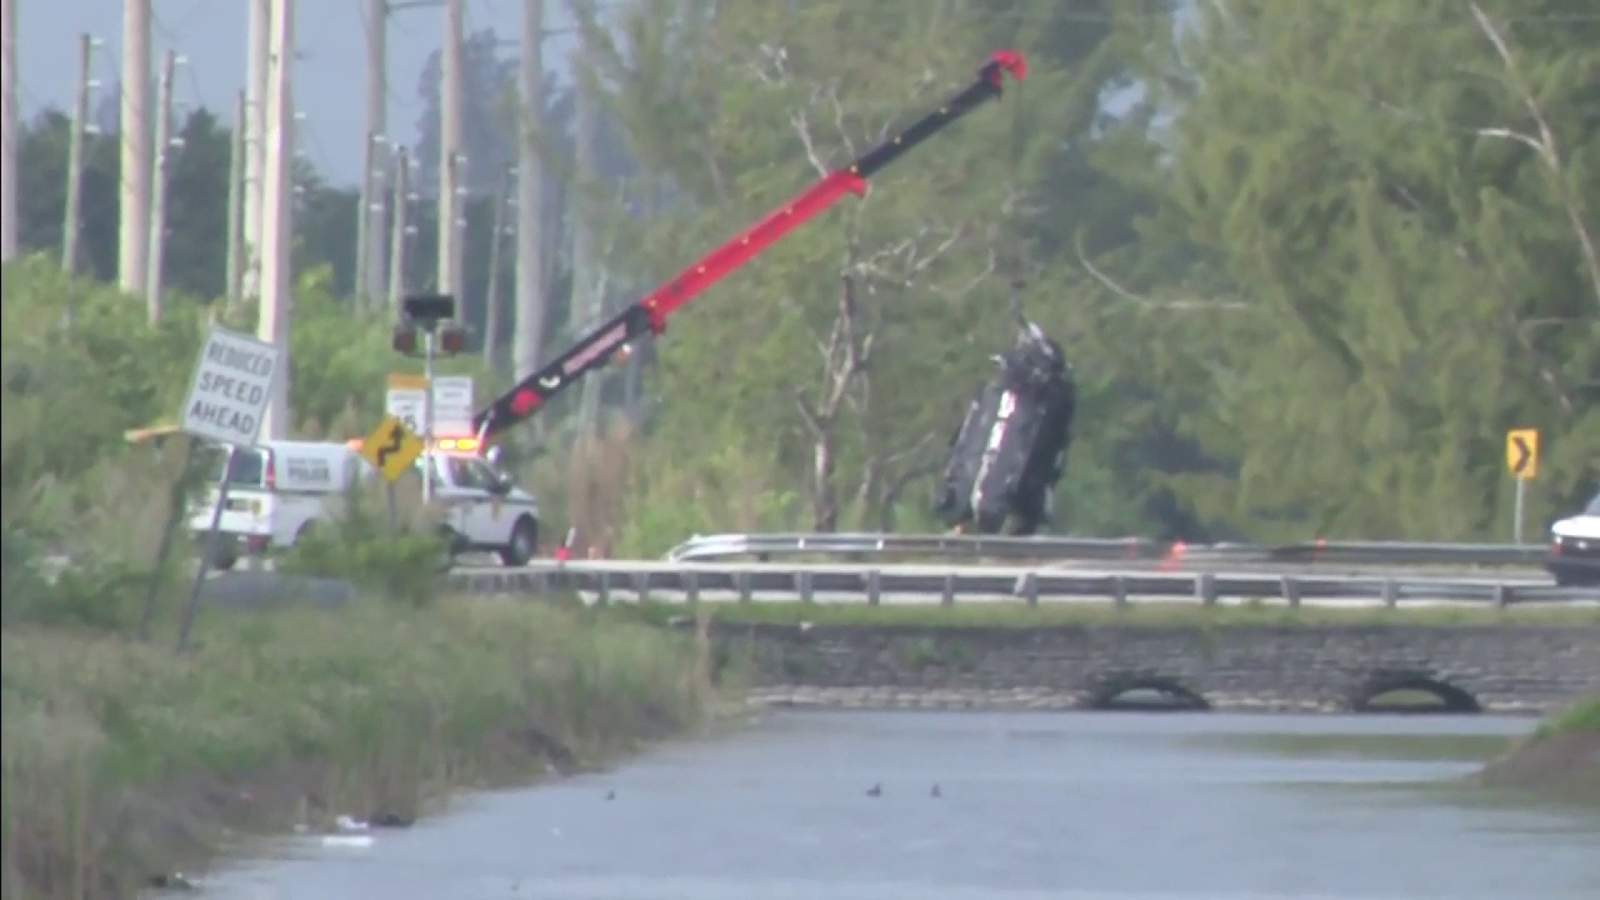 3 people dead, 1 injured after car plunges into canal near Homestead International Speedway